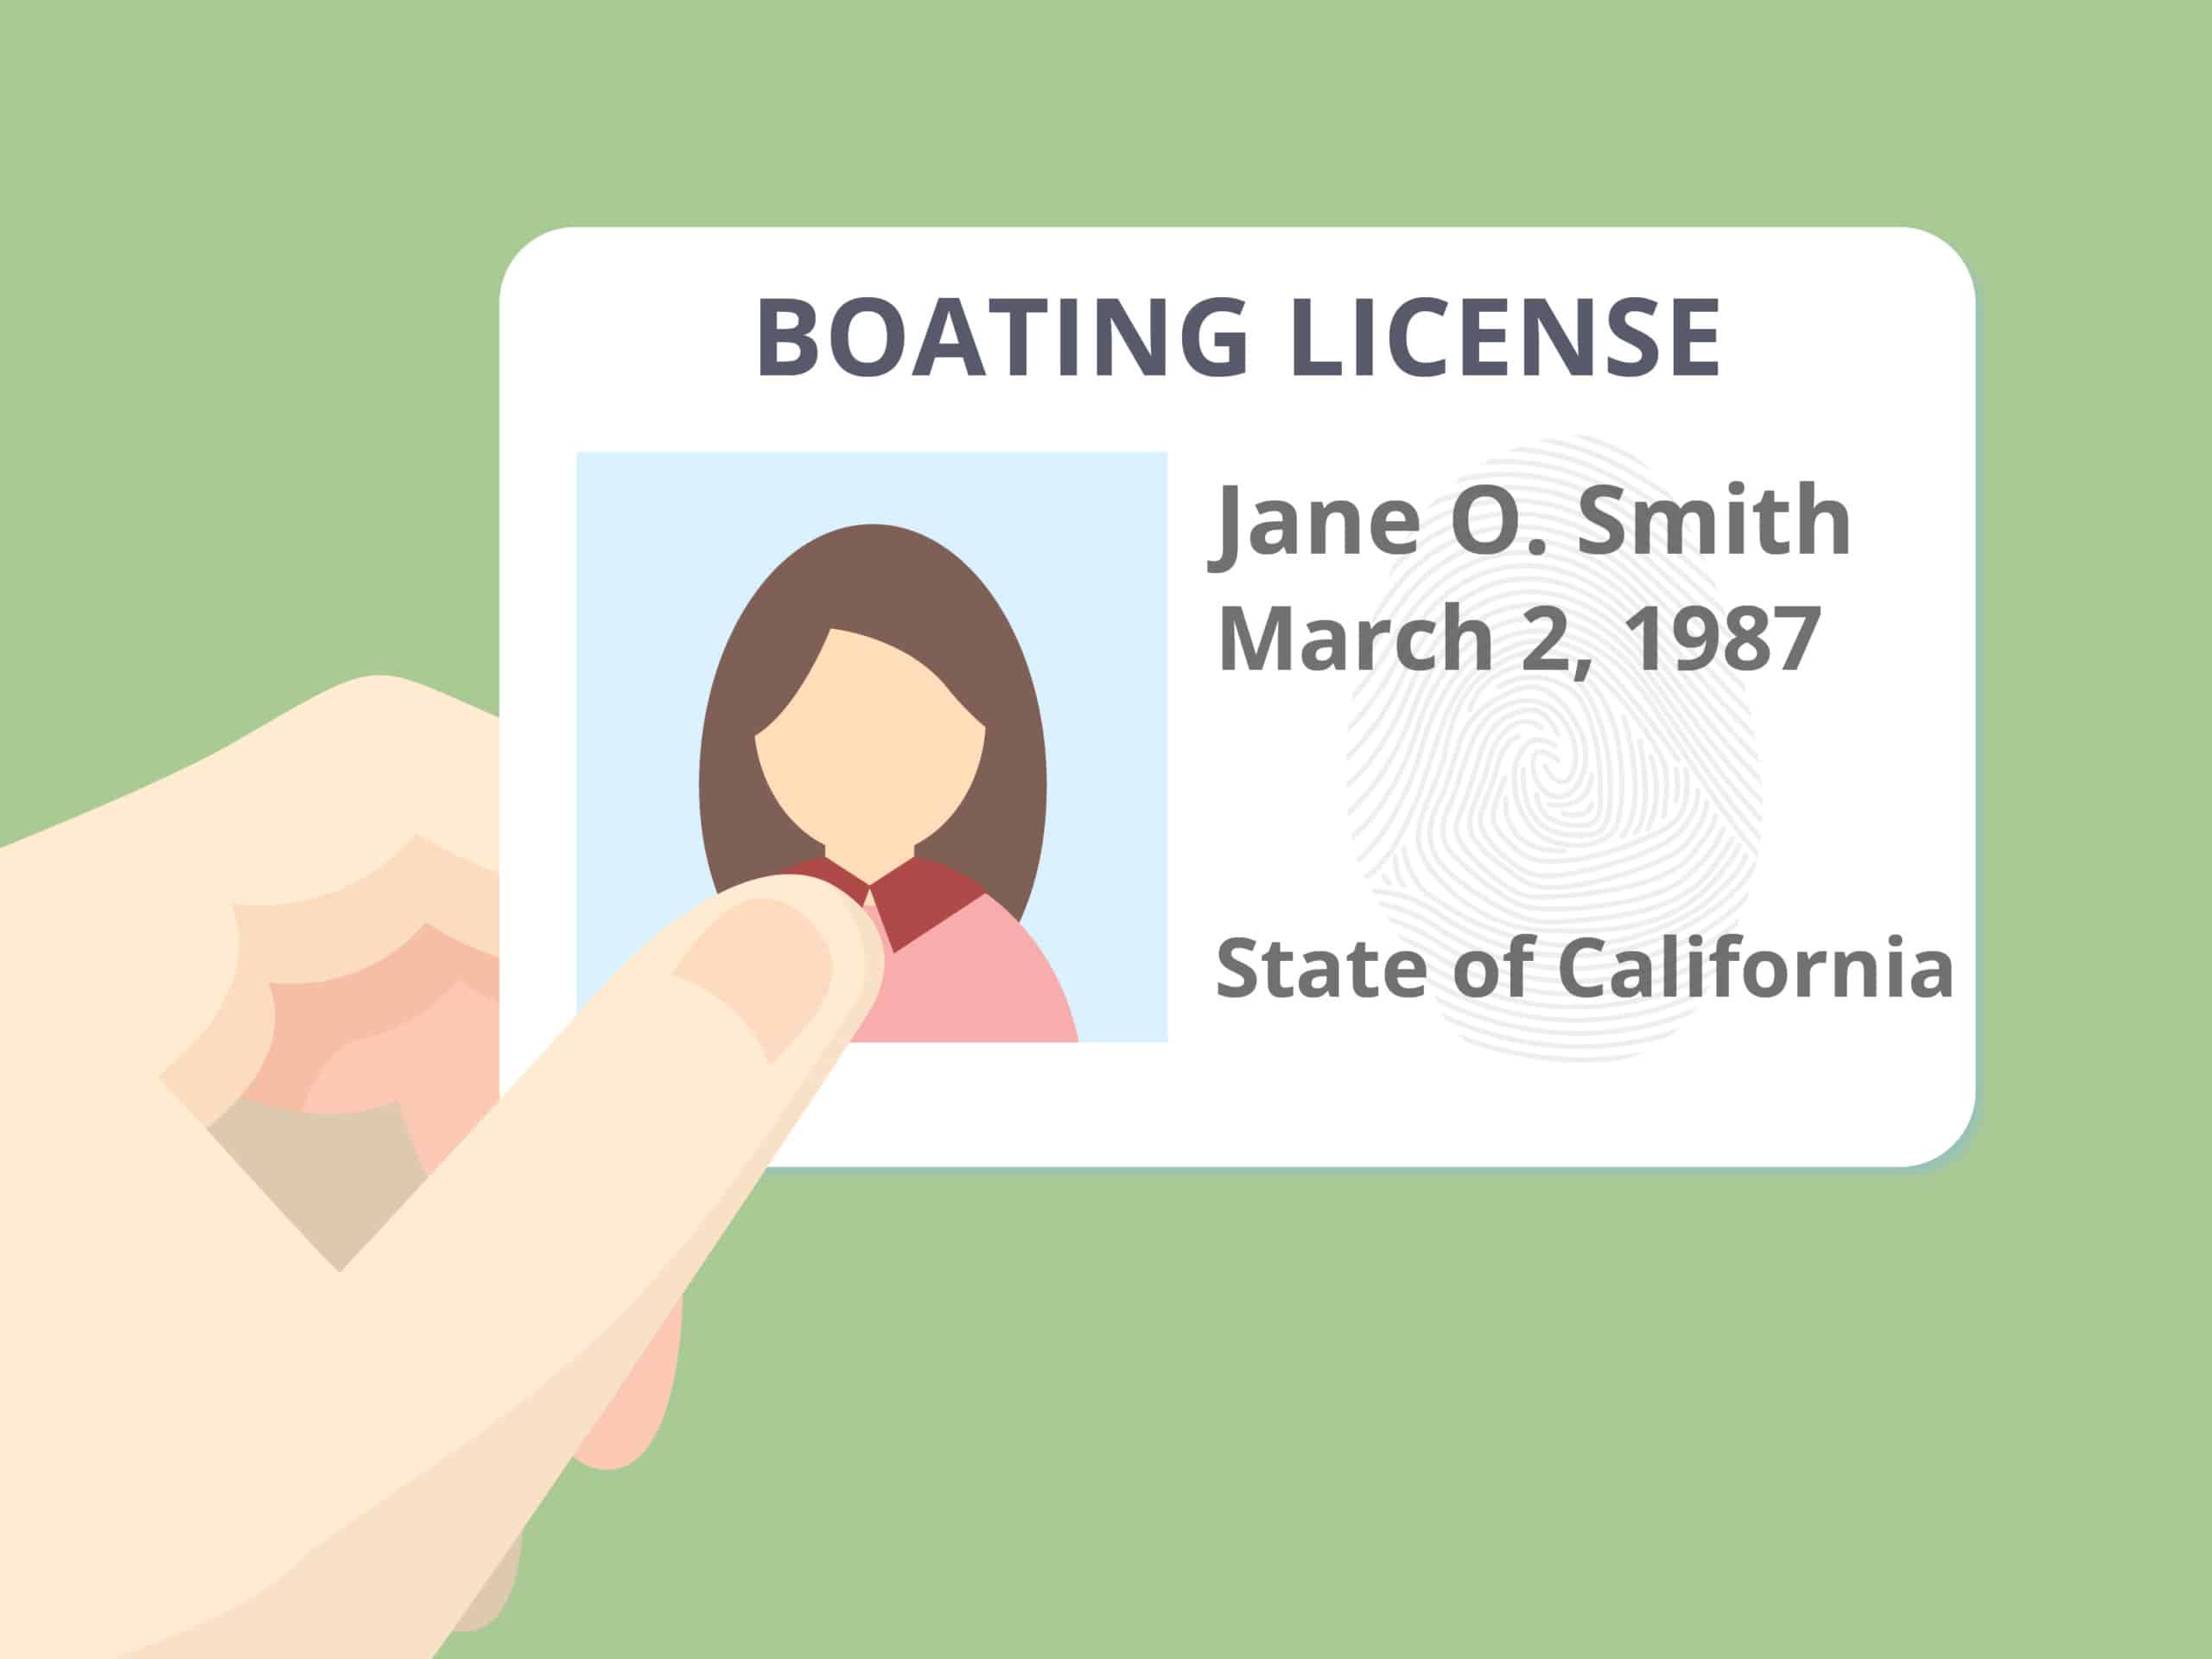 Boat licenses can be used in different states